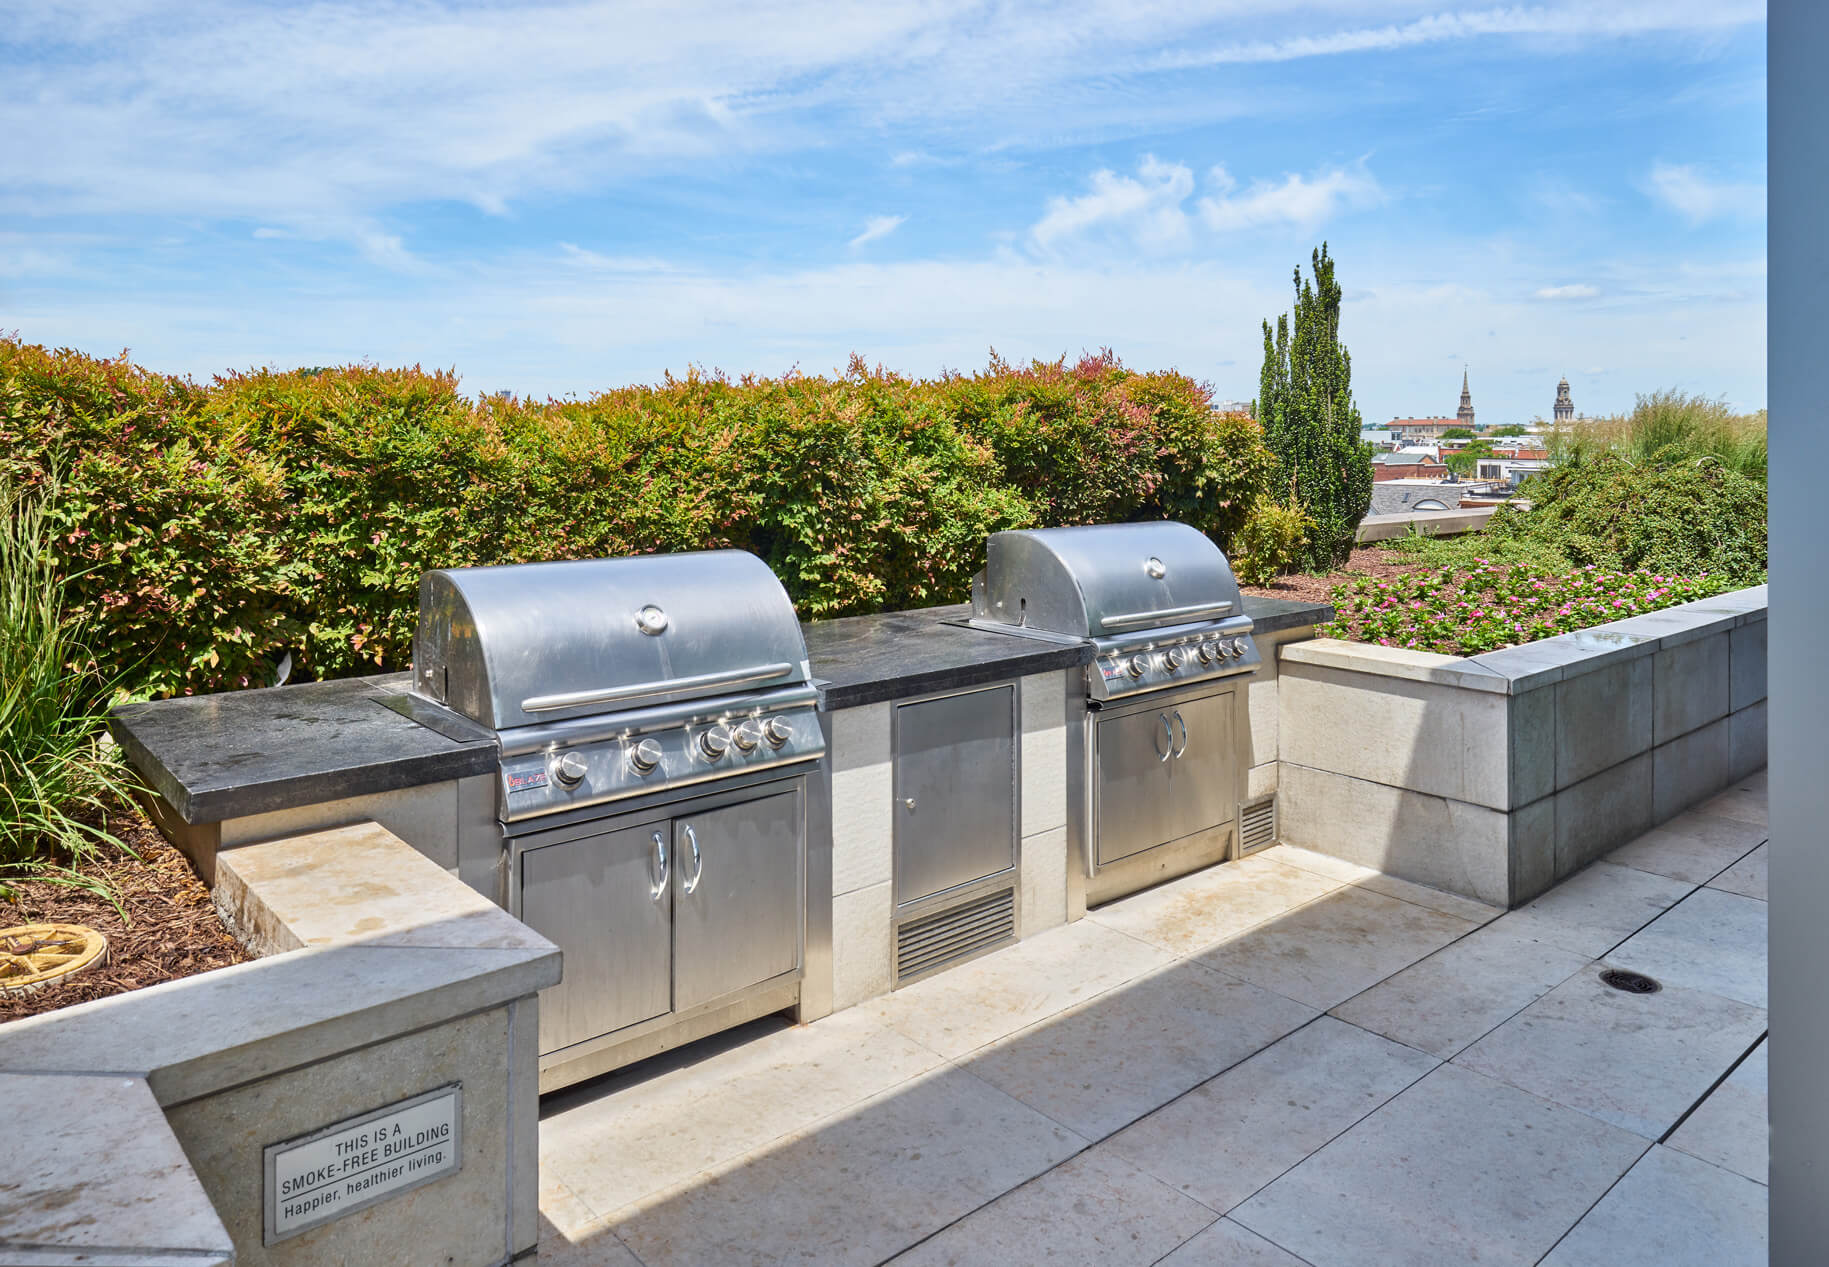 Capitol View gas grills